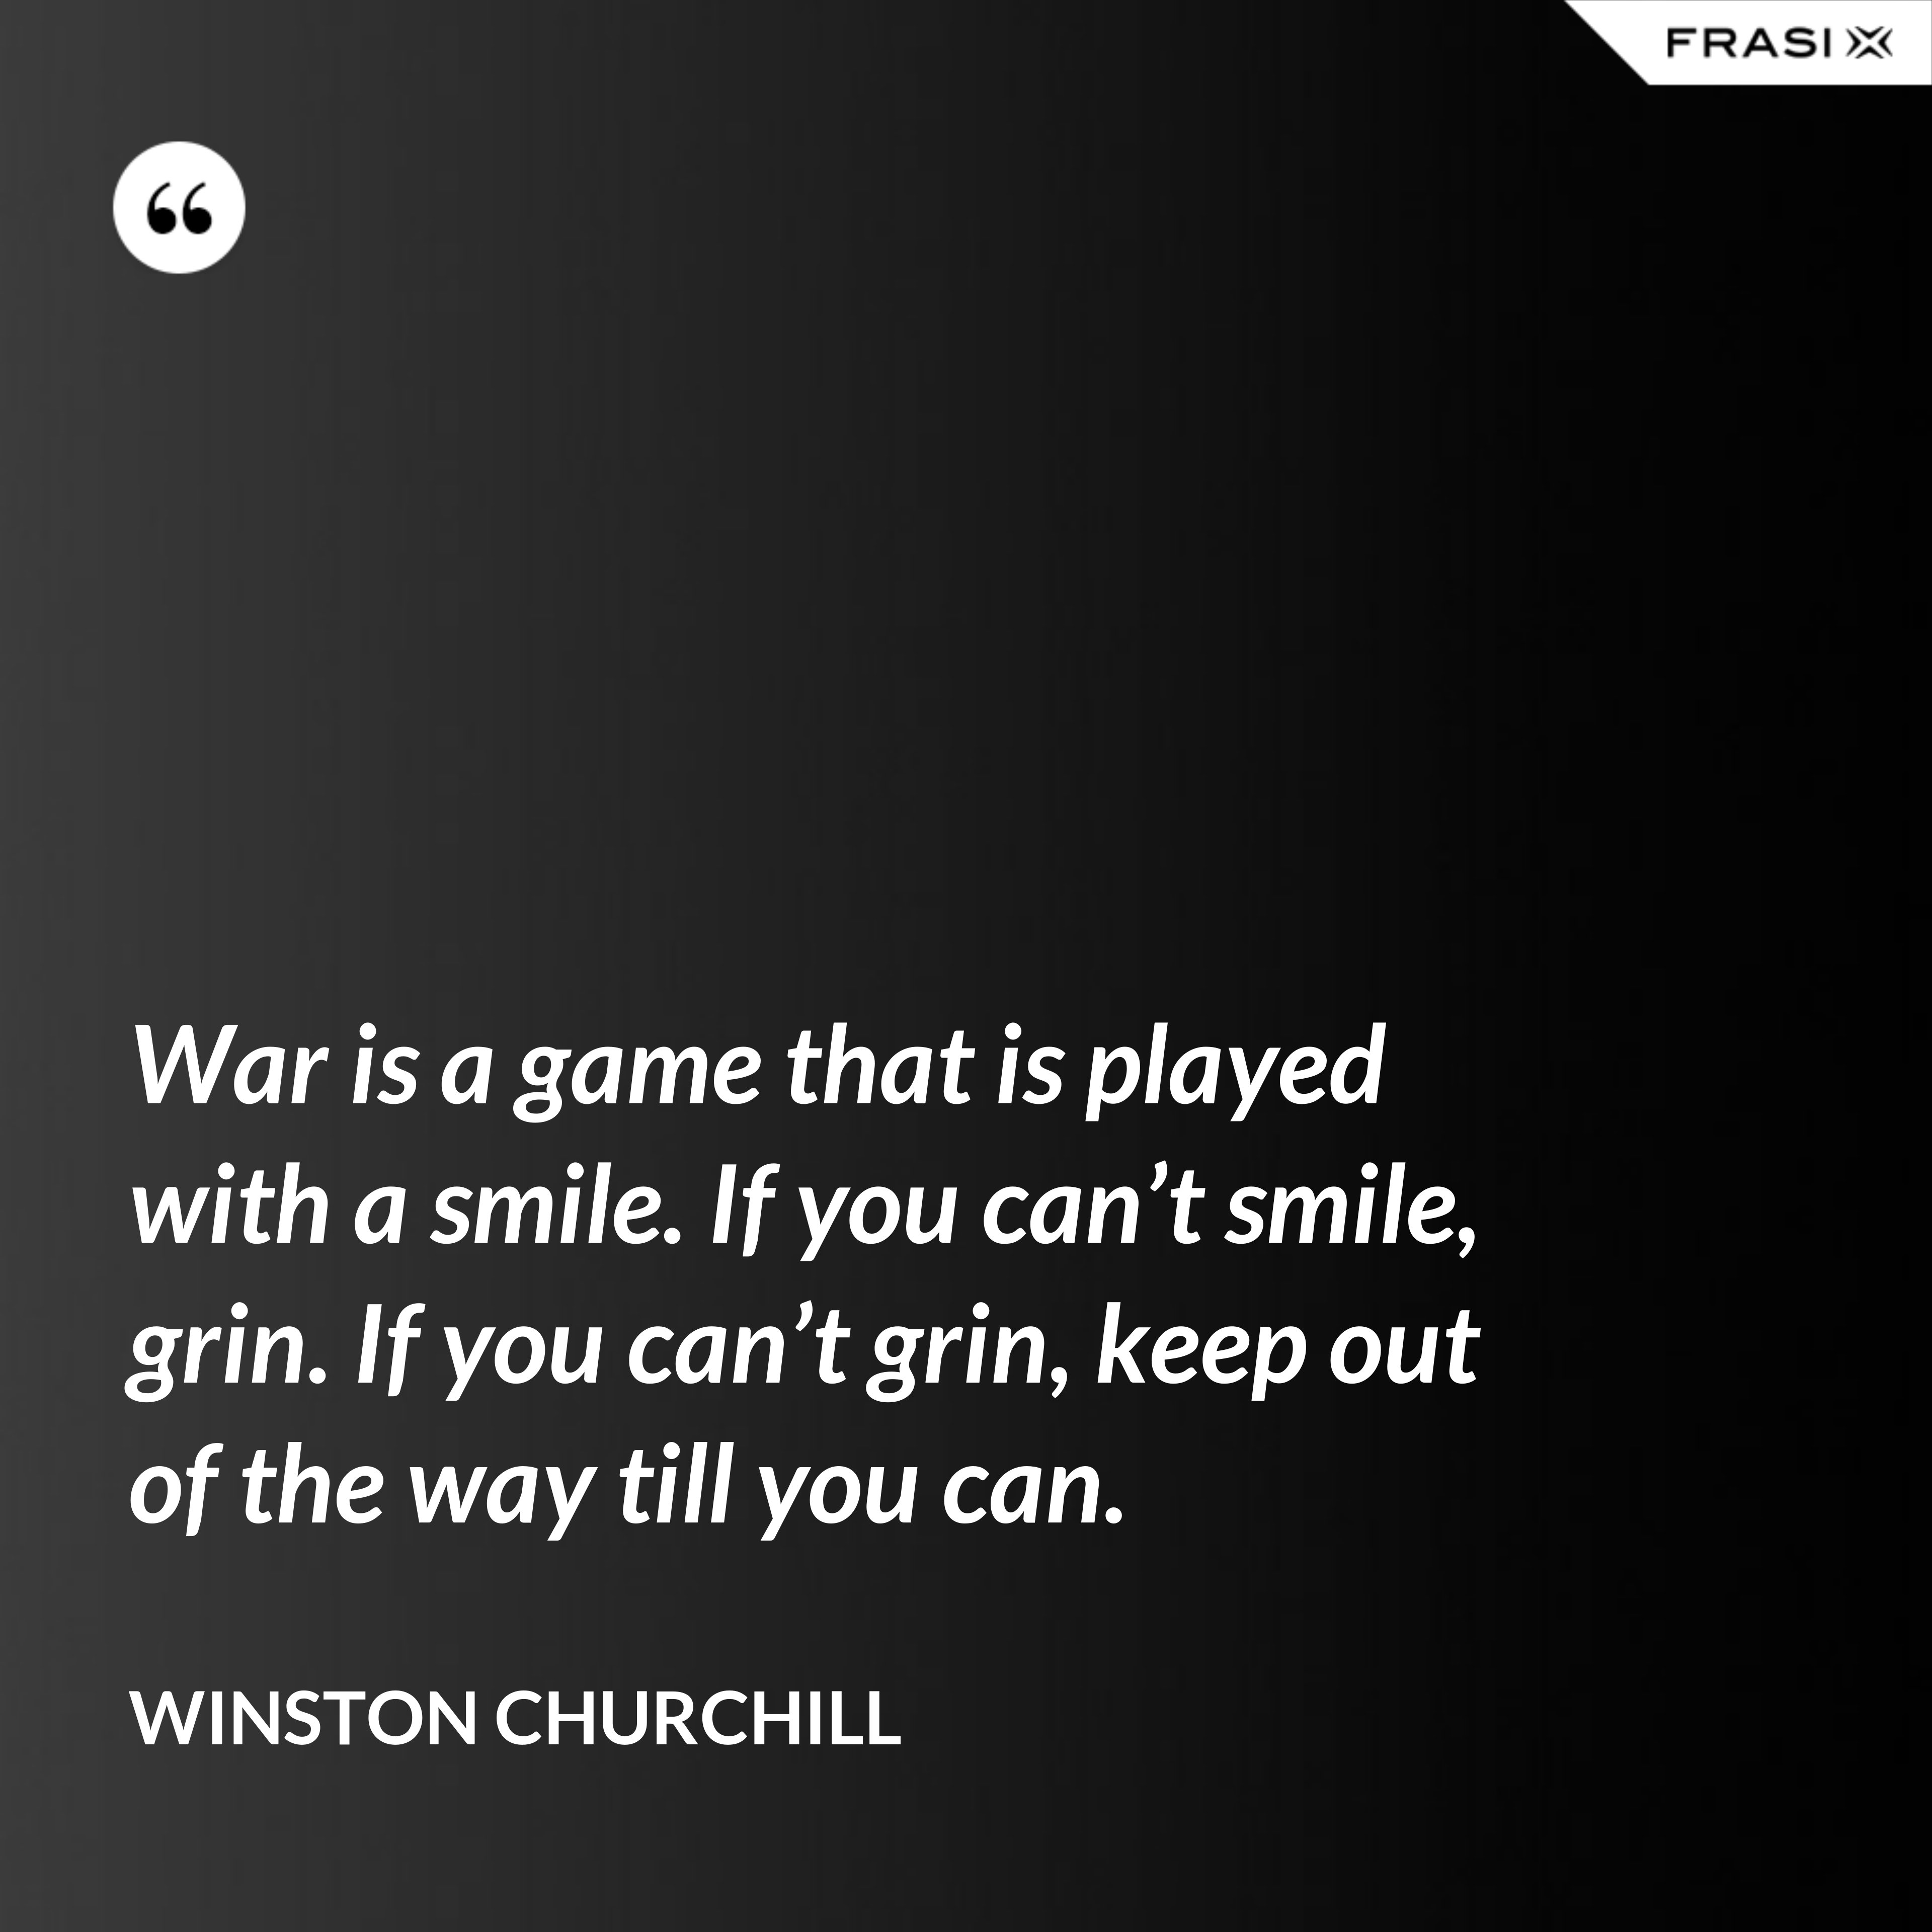 War is a game that is played with a smile. If you can’t smile, grin. If you can’t grin, keep out of the way till you can. - Winston Churchill